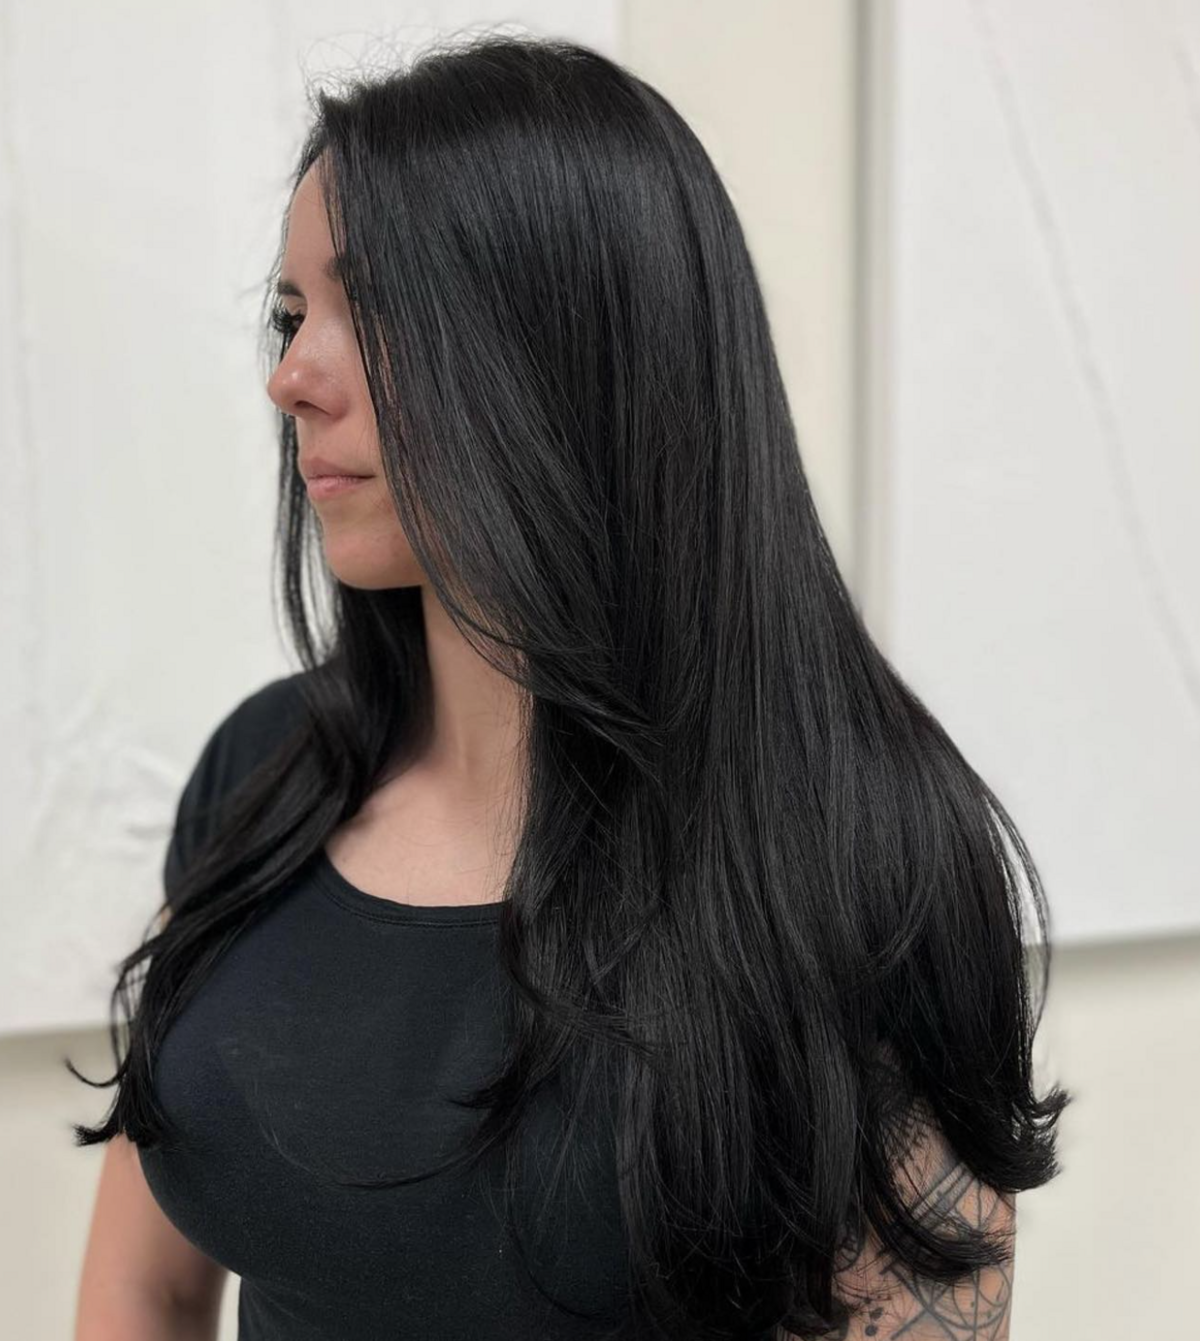 Elevate your look with Nova Strands Salon's straight jet black hair expertise. Experience timeless elegance today.